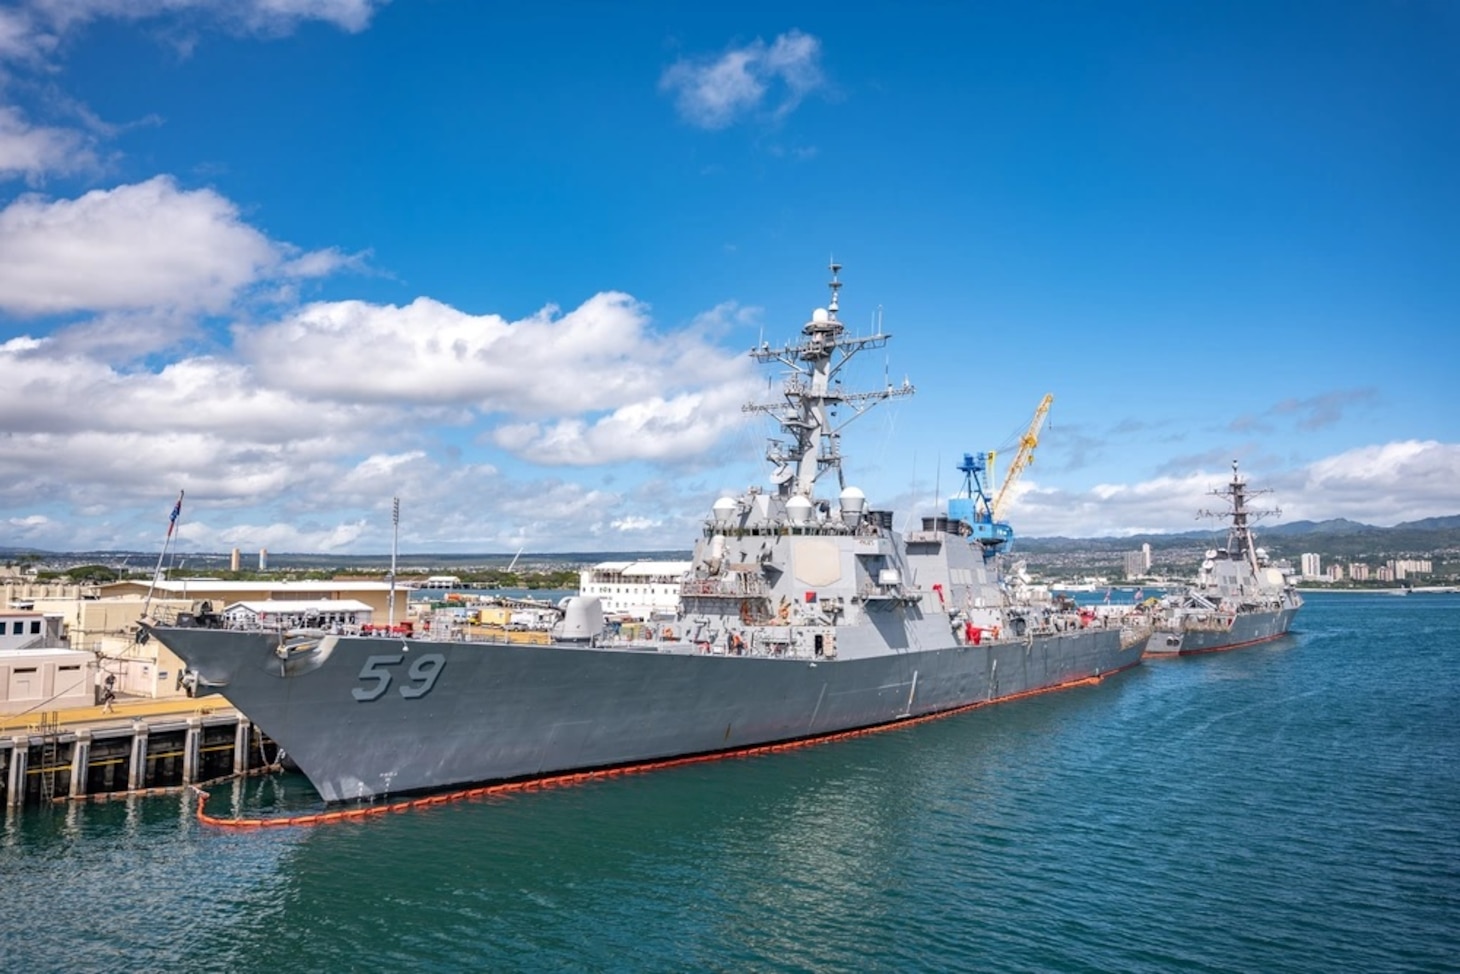 USS Russell Completes First Deployment Milestone - Arrives in Pearl Harbor [Image 14 of 14]